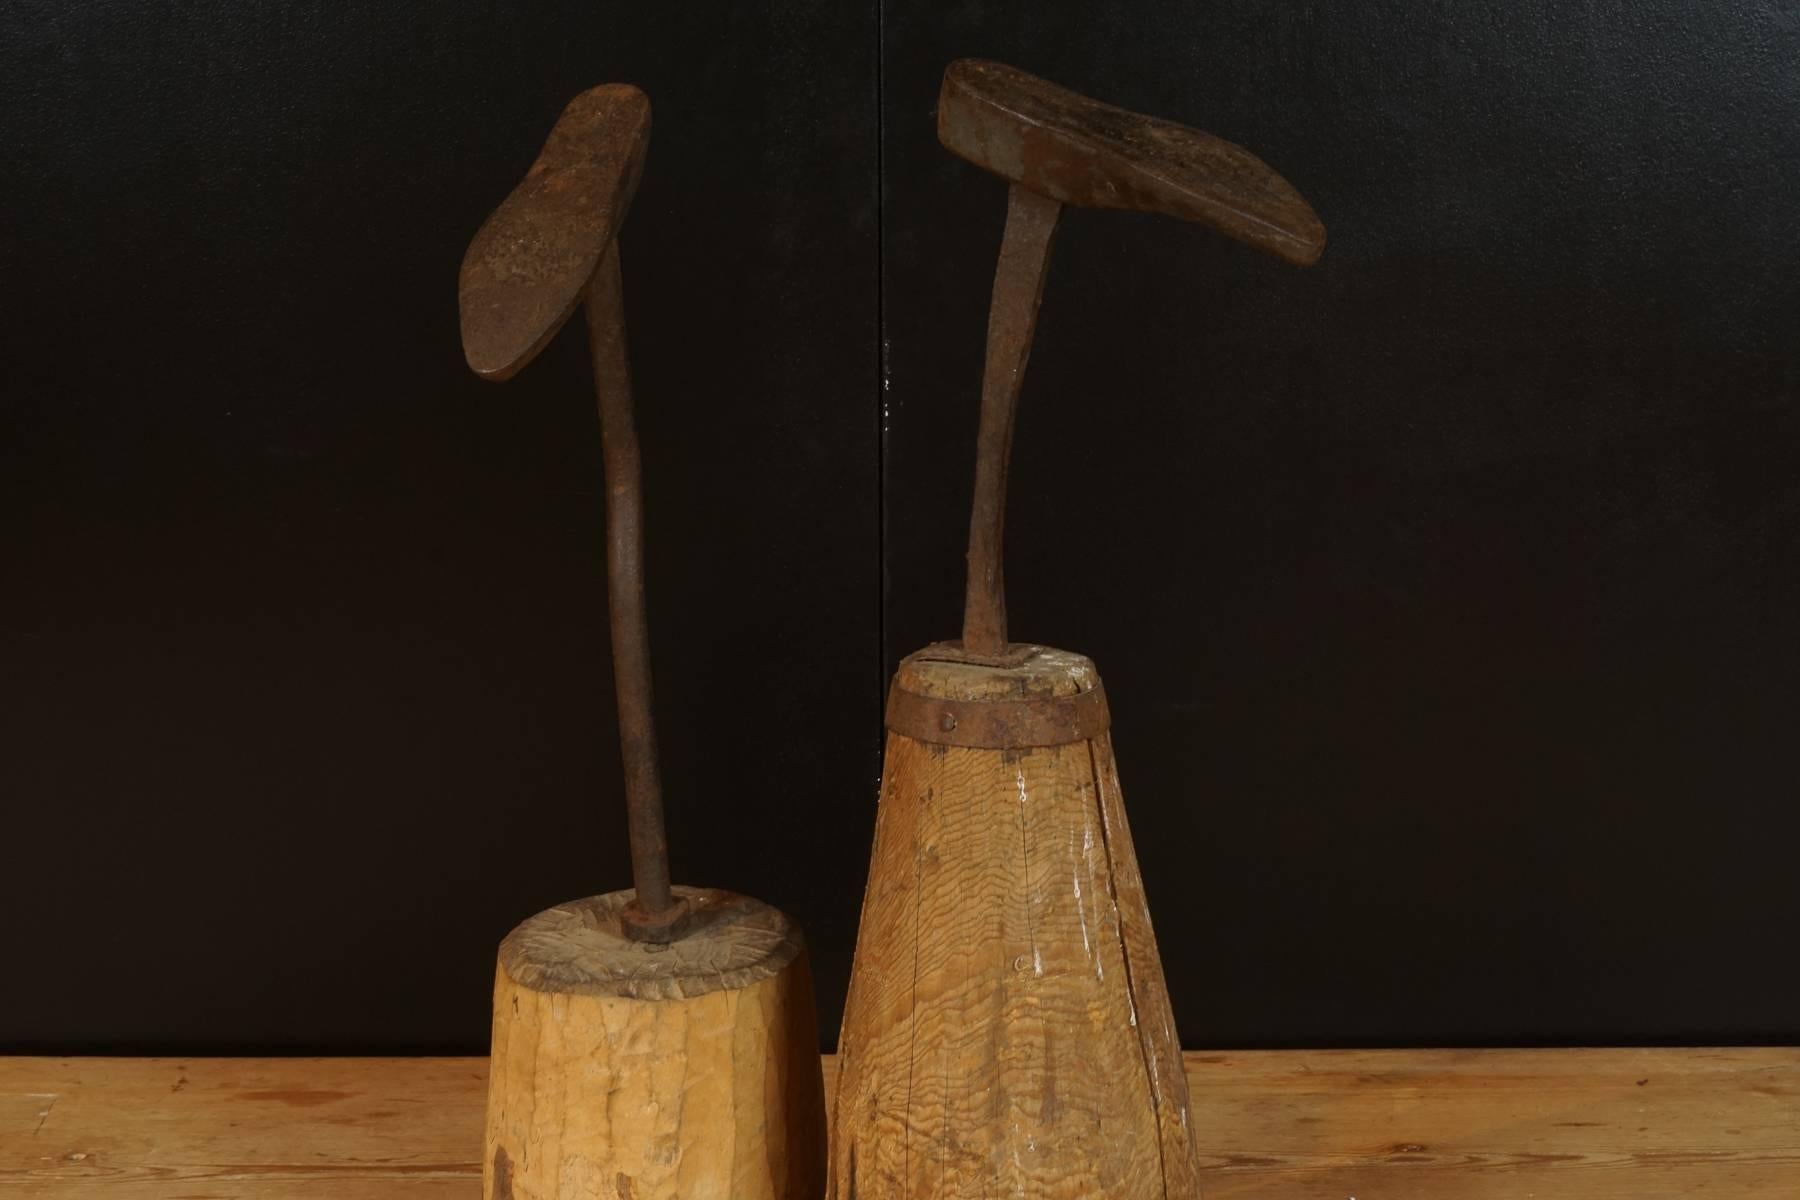 Pair of cobbler molds from Sweden, circa 1880. Iron molds mounted on wood bases.